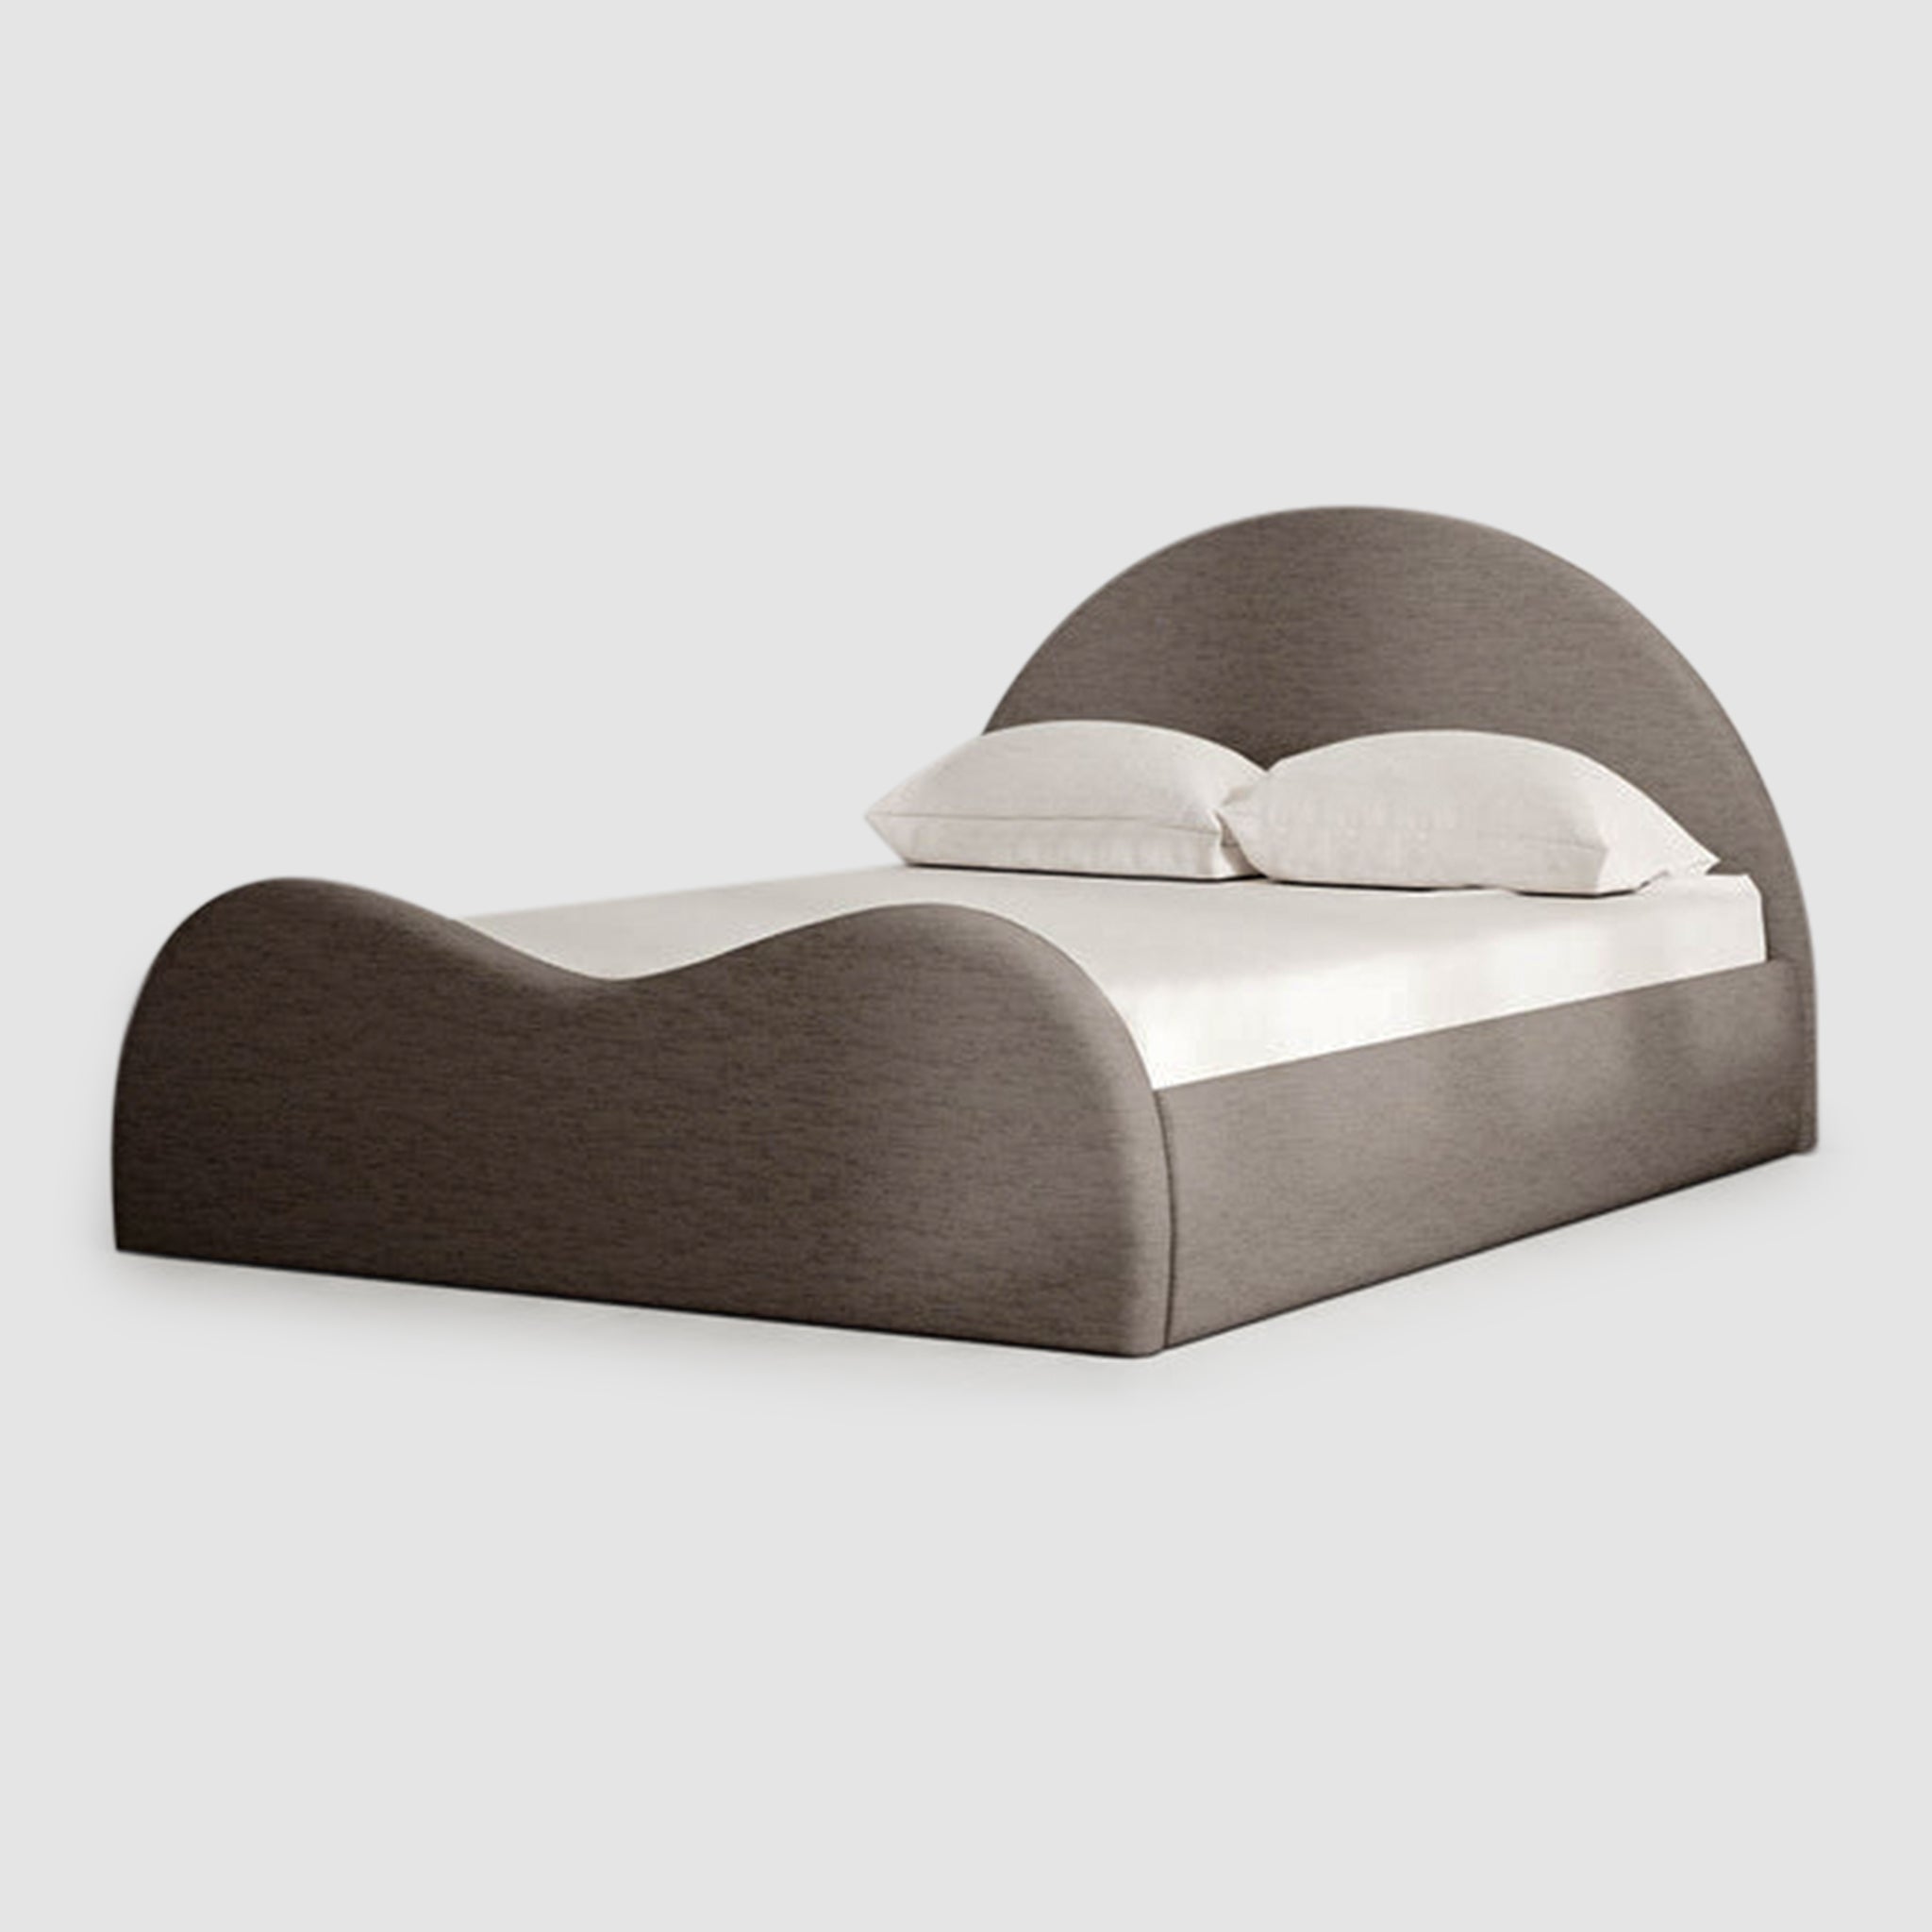 The Dolly Bed in charcoal grey, offering a modern look.